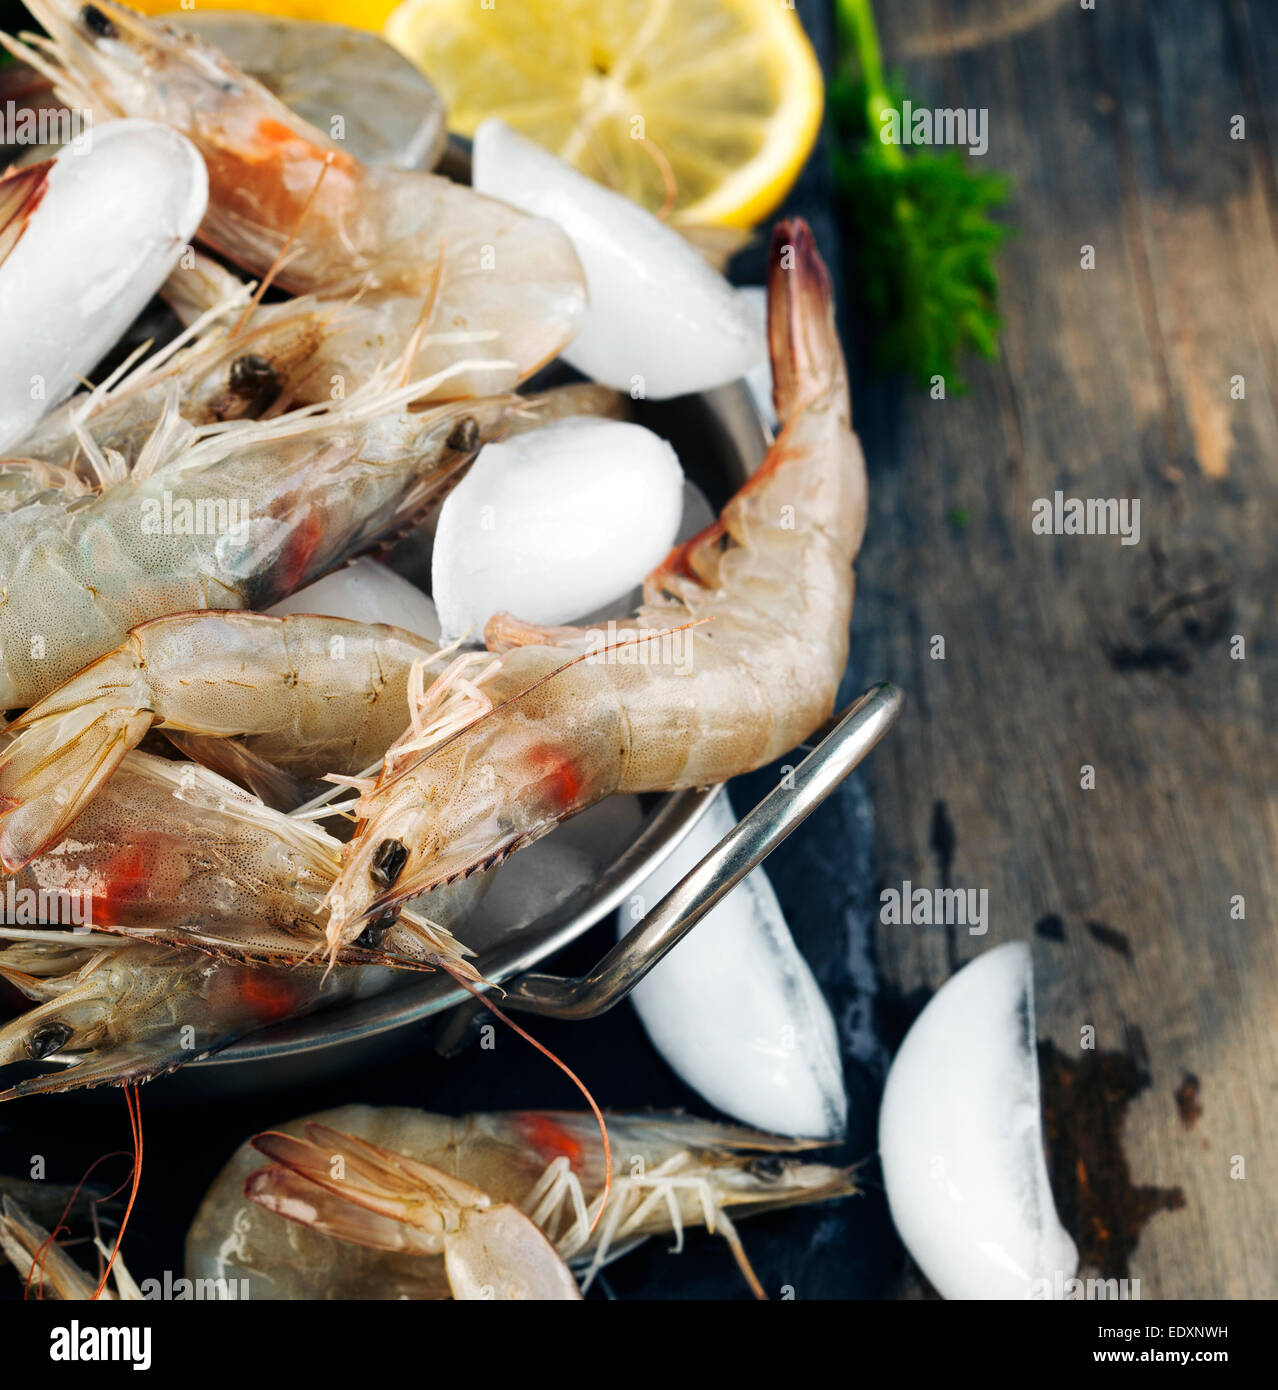 Raw Shrimps on ice with fresh dill and lemon Stock Photo